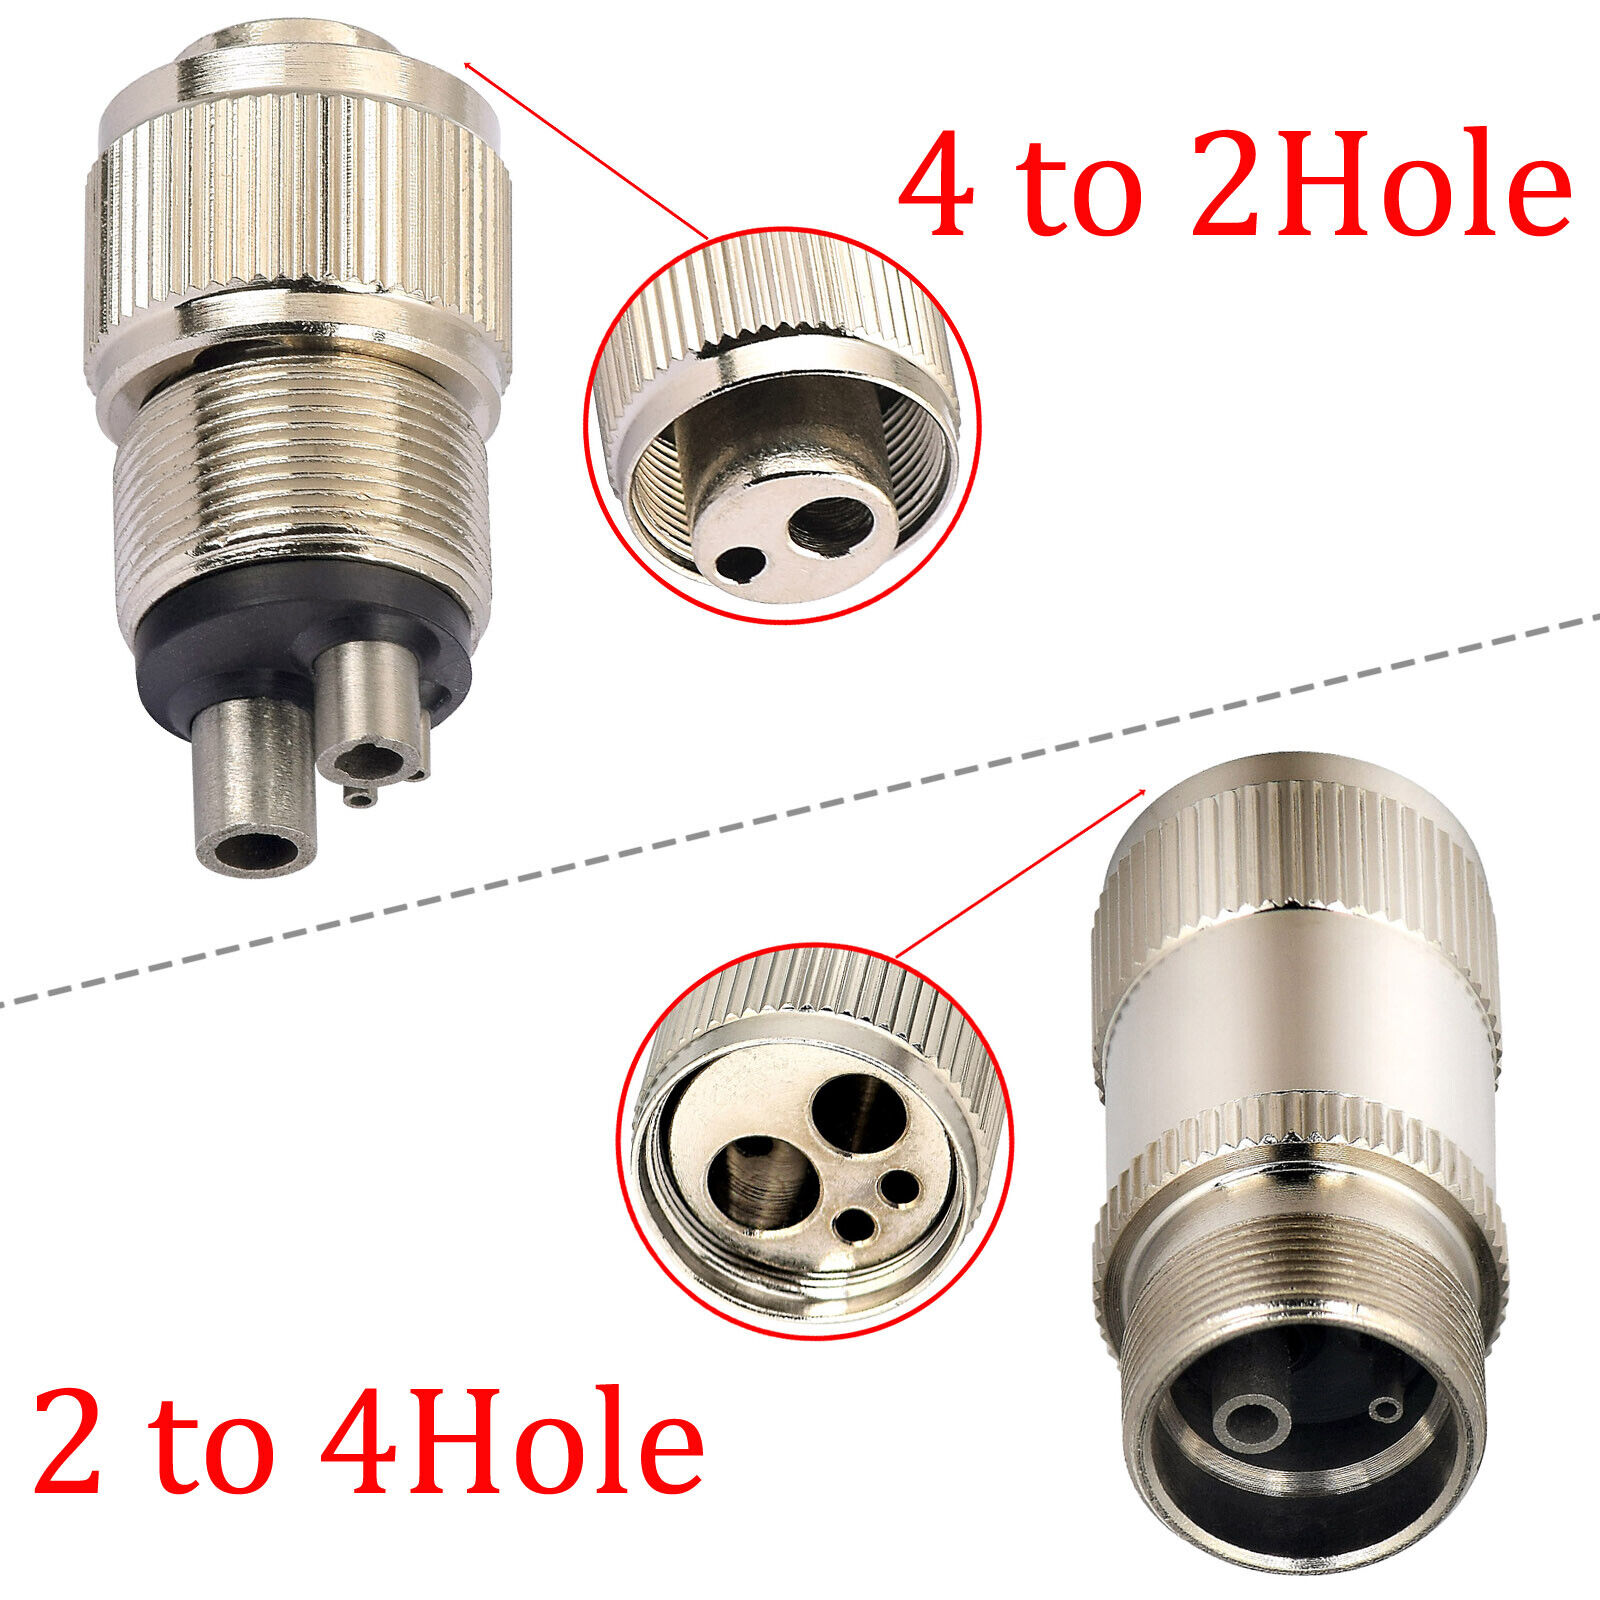 Dental 2 Classic to 4 & Hole Adapter Connector Miami Mall for S Changer High